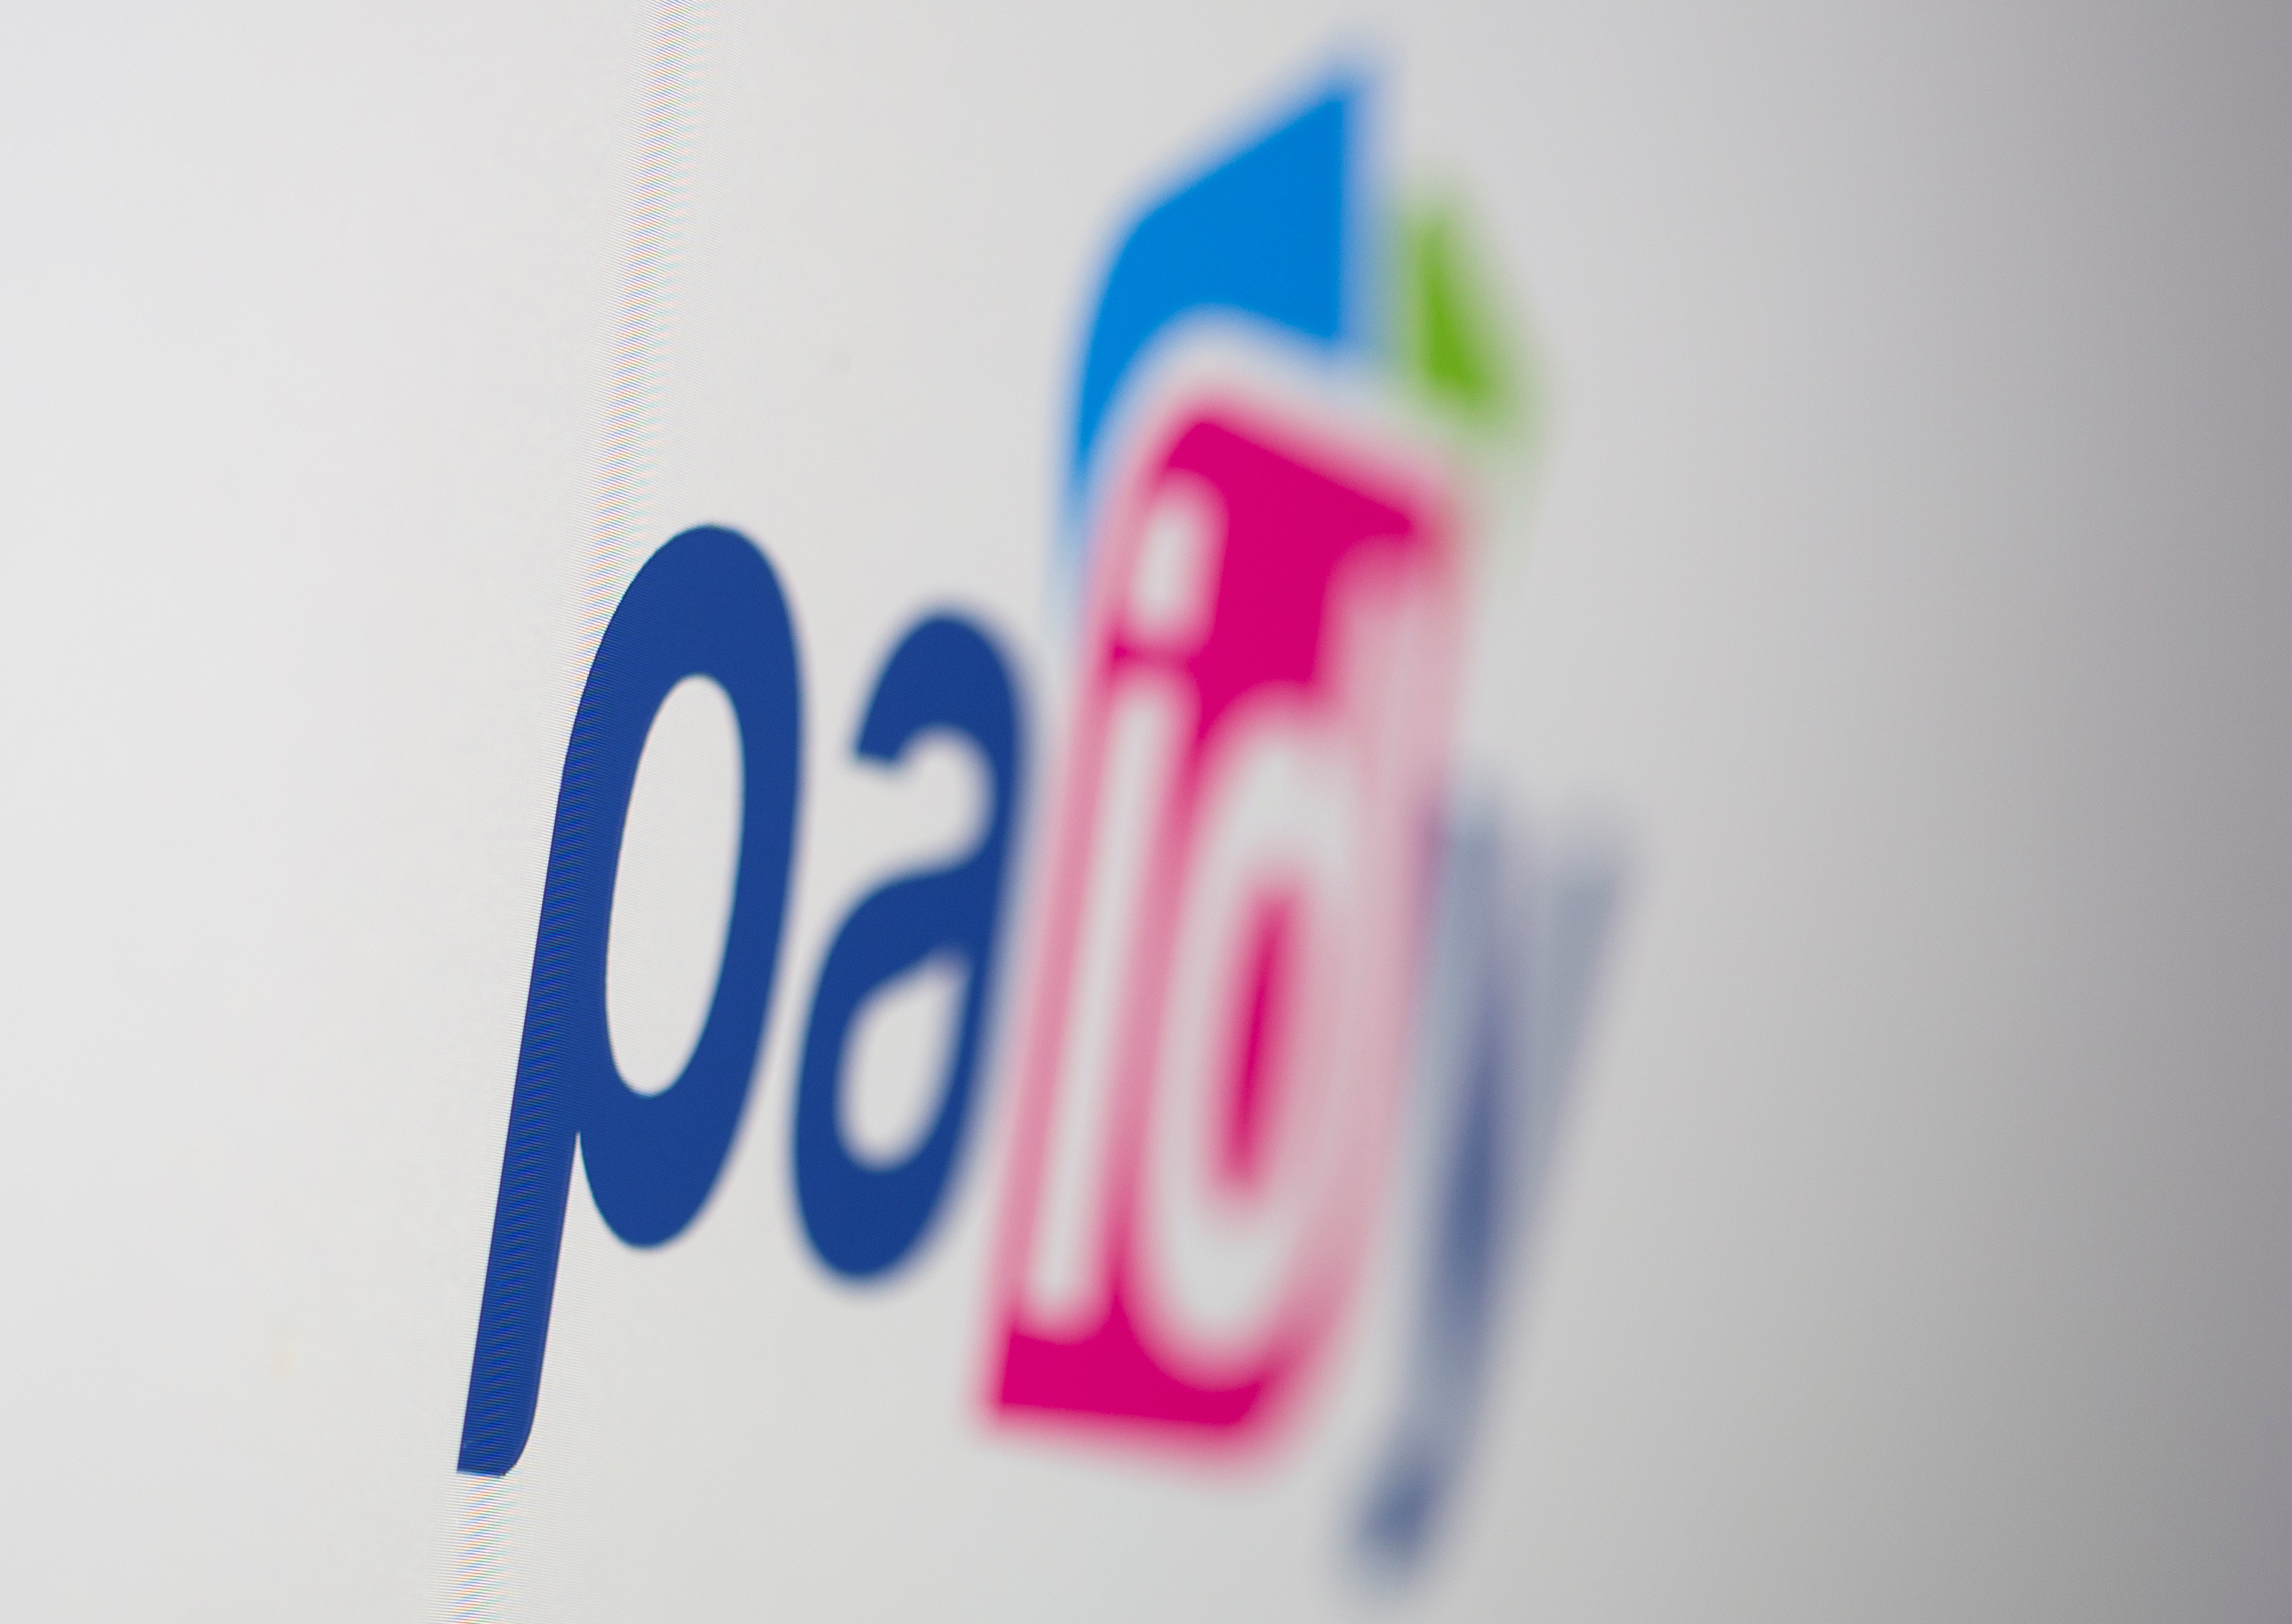 Paidy logo is seen displayed in this illustration